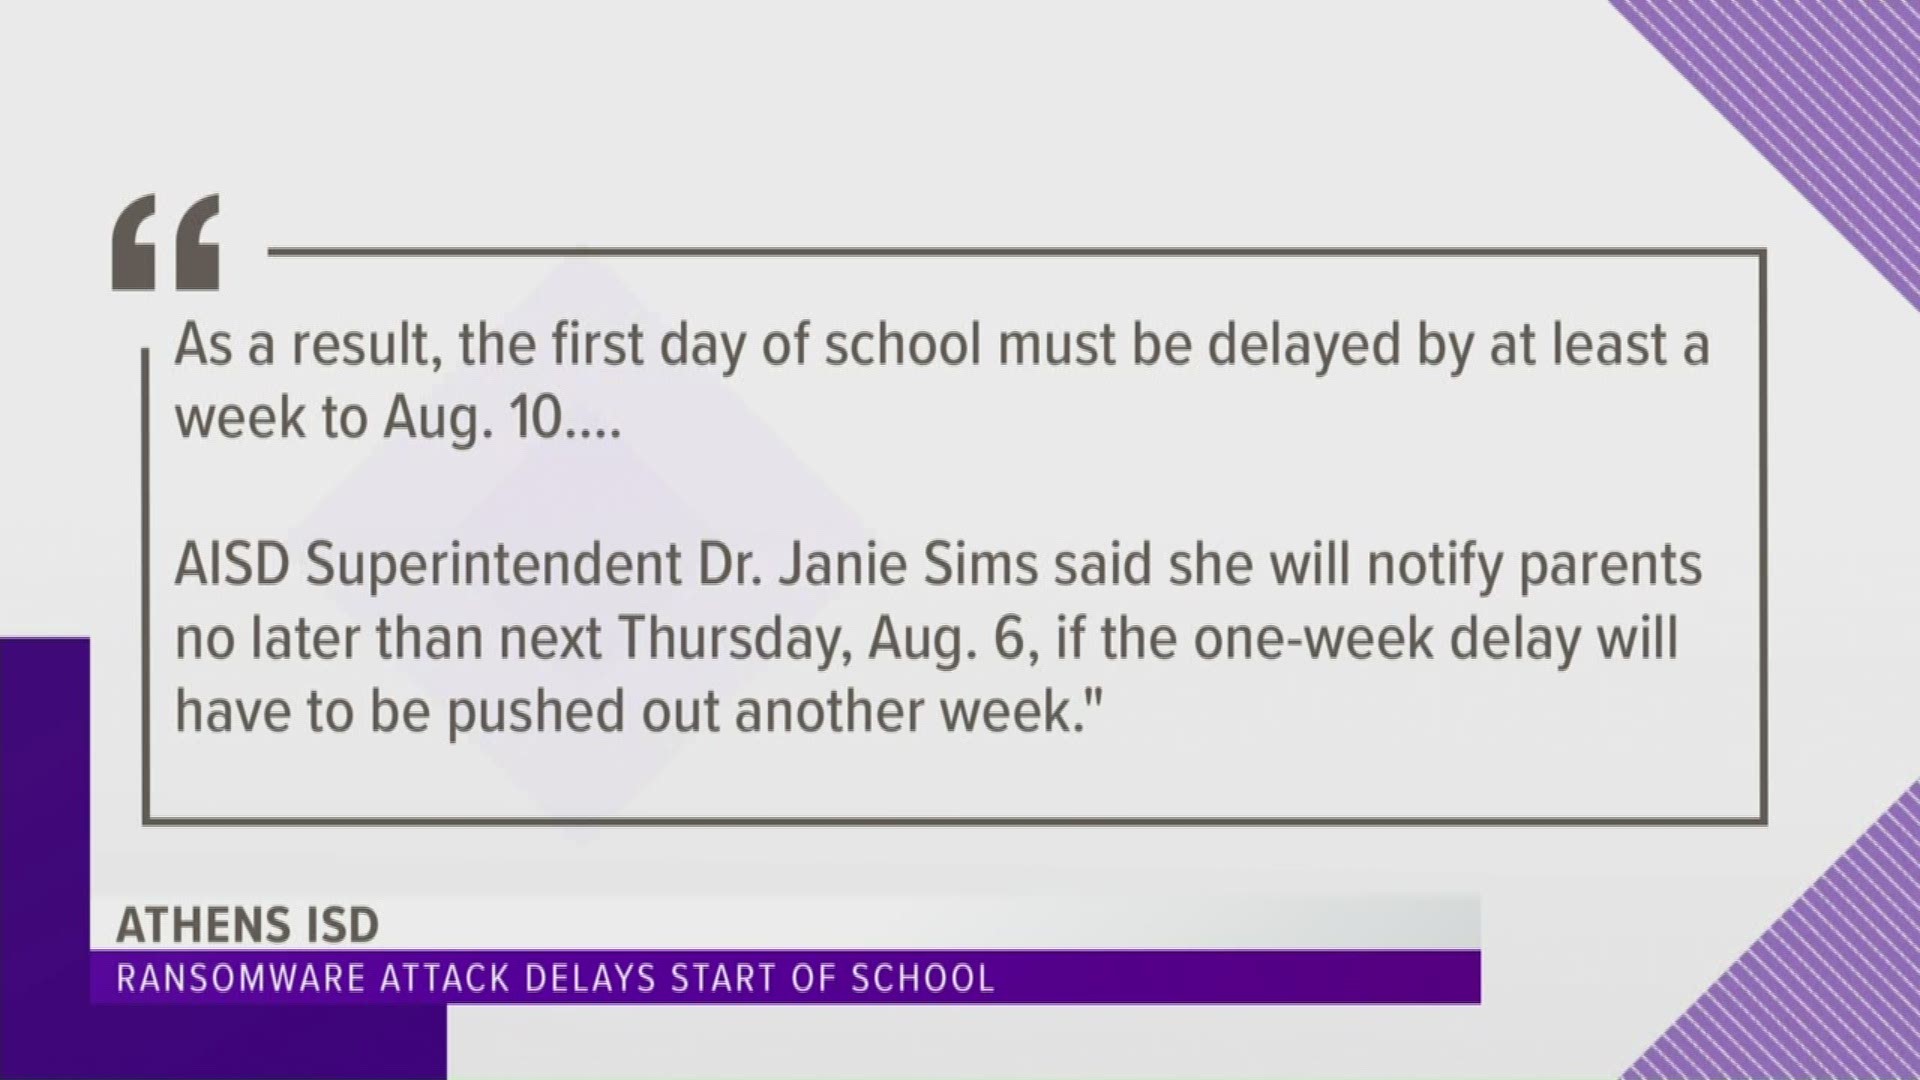 As a result, the first day of school will be delayed to Aug. 10